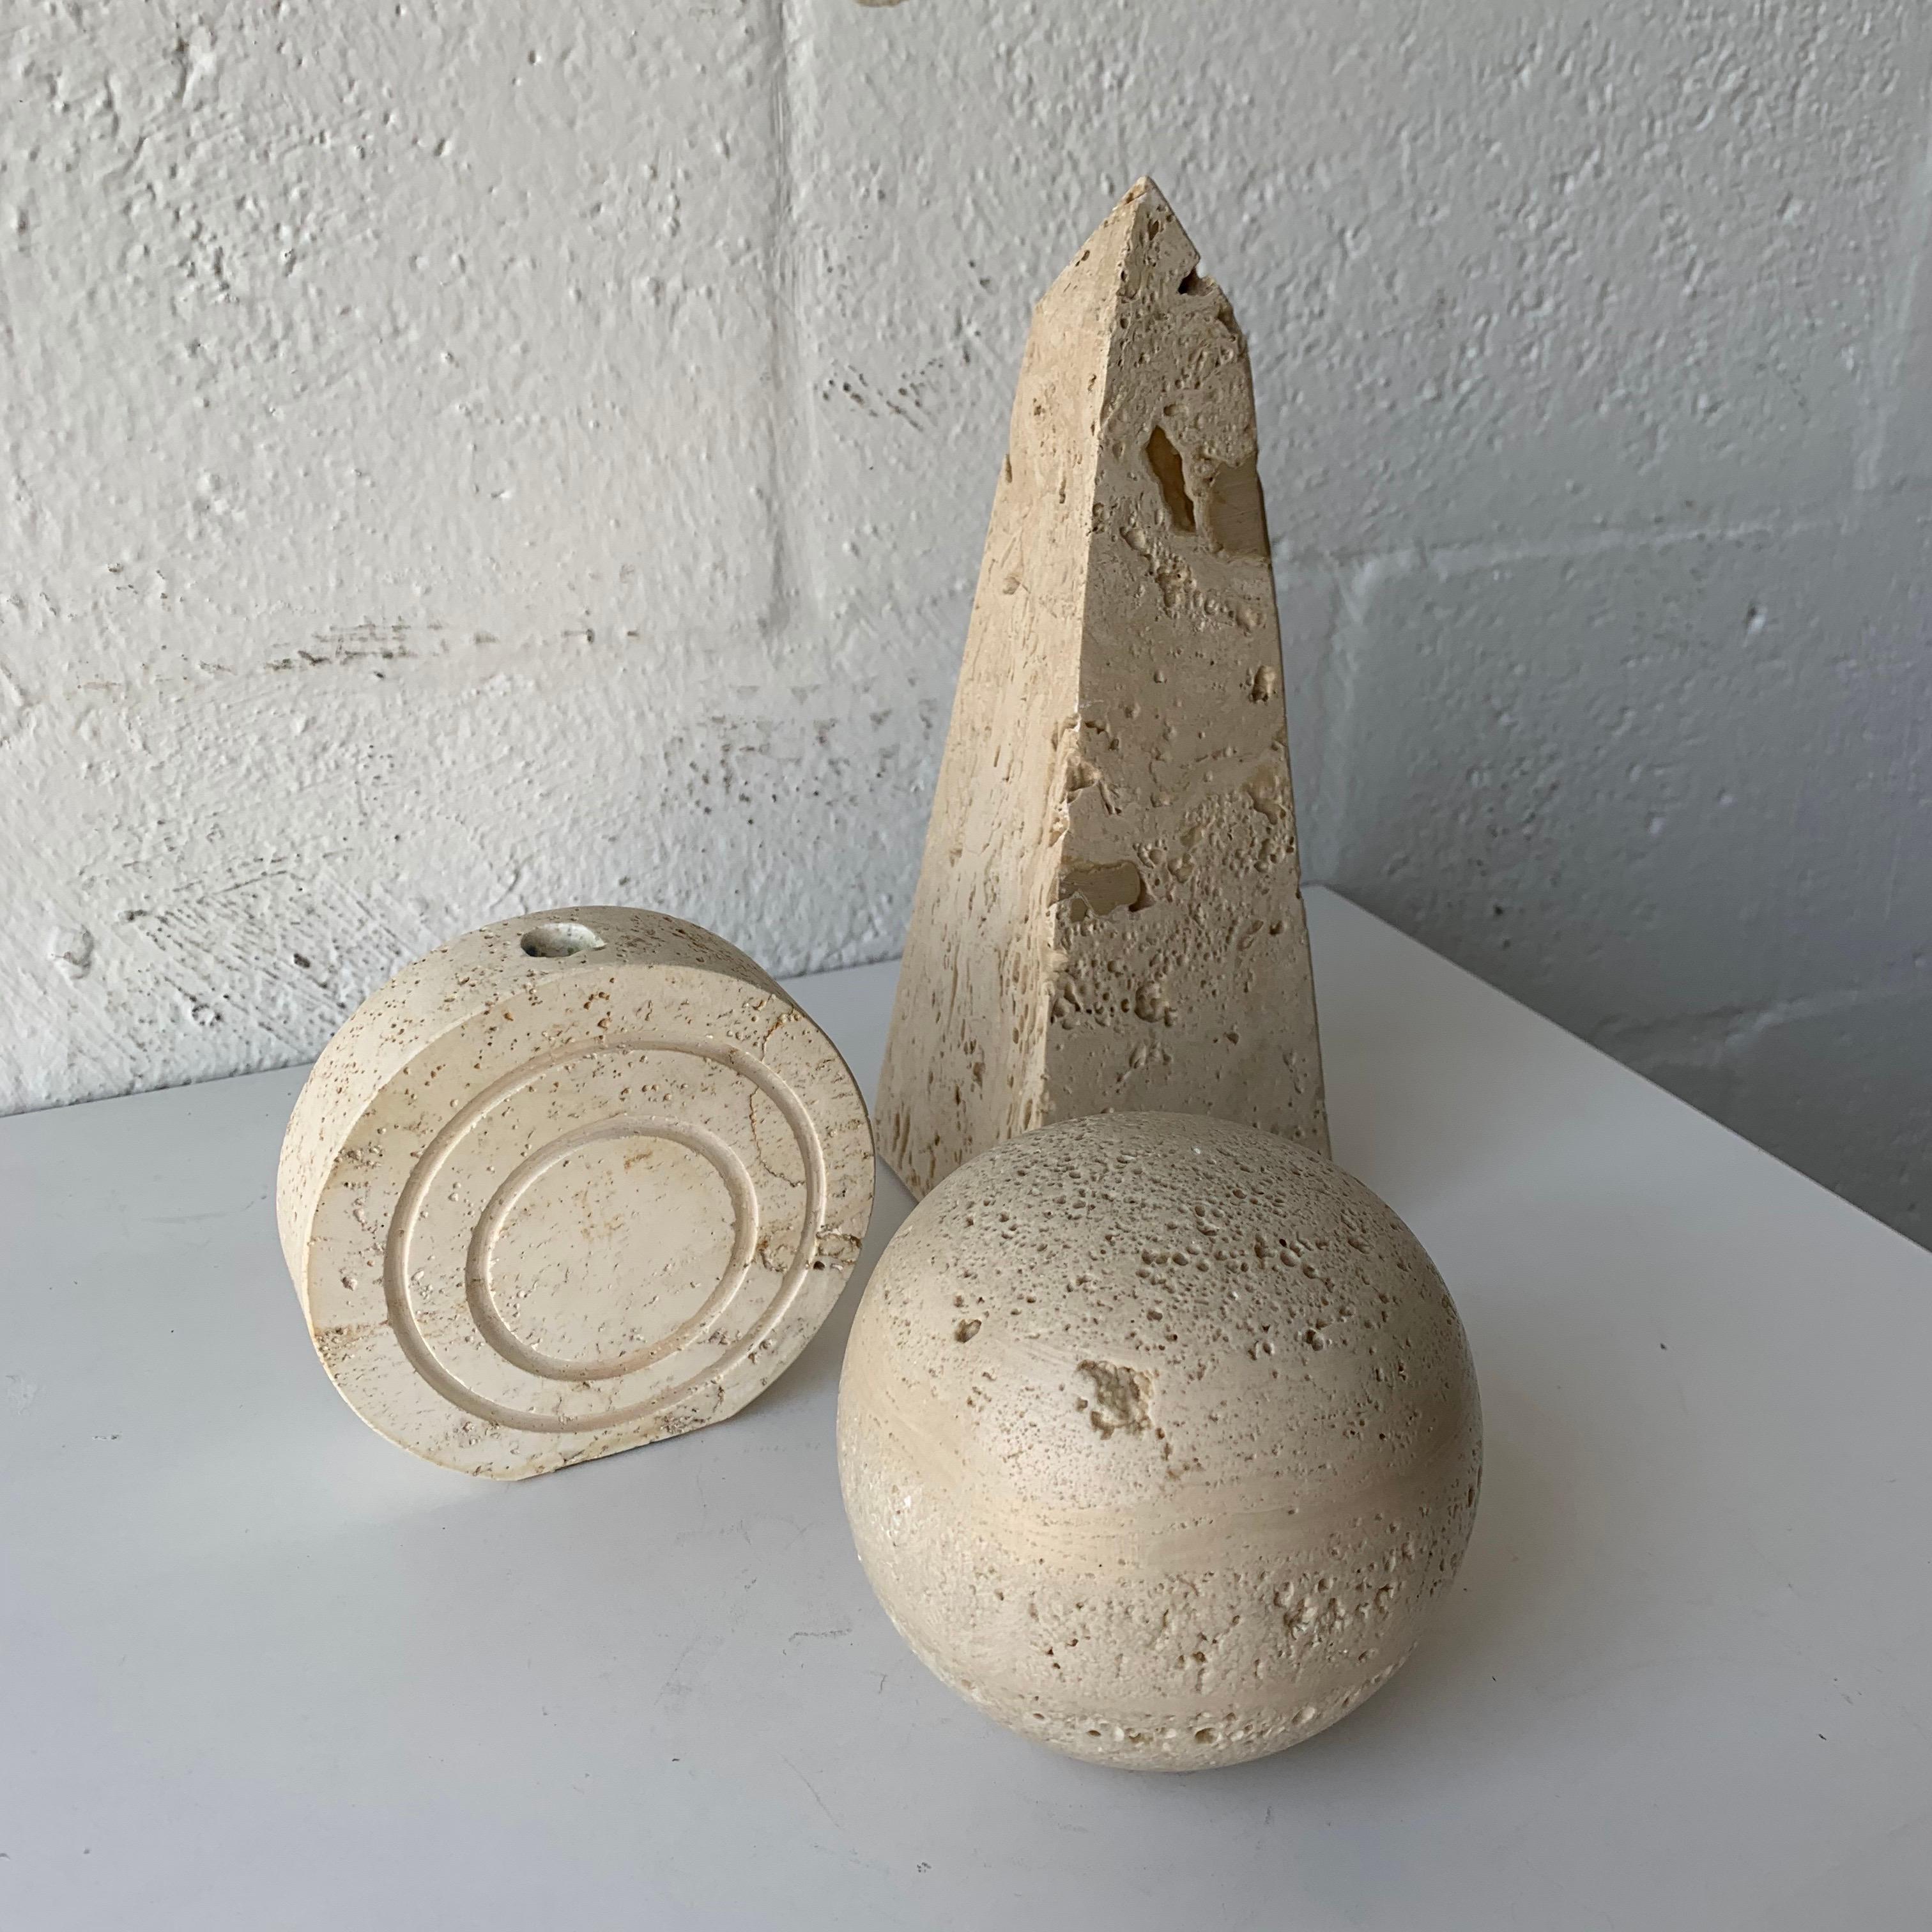 Collection of objects consisting of an obelisk, sphere, and disk or puck bud vase, rendered in travertine designed by F. Lli Mannelli for Raymor, Italy, 1960s.